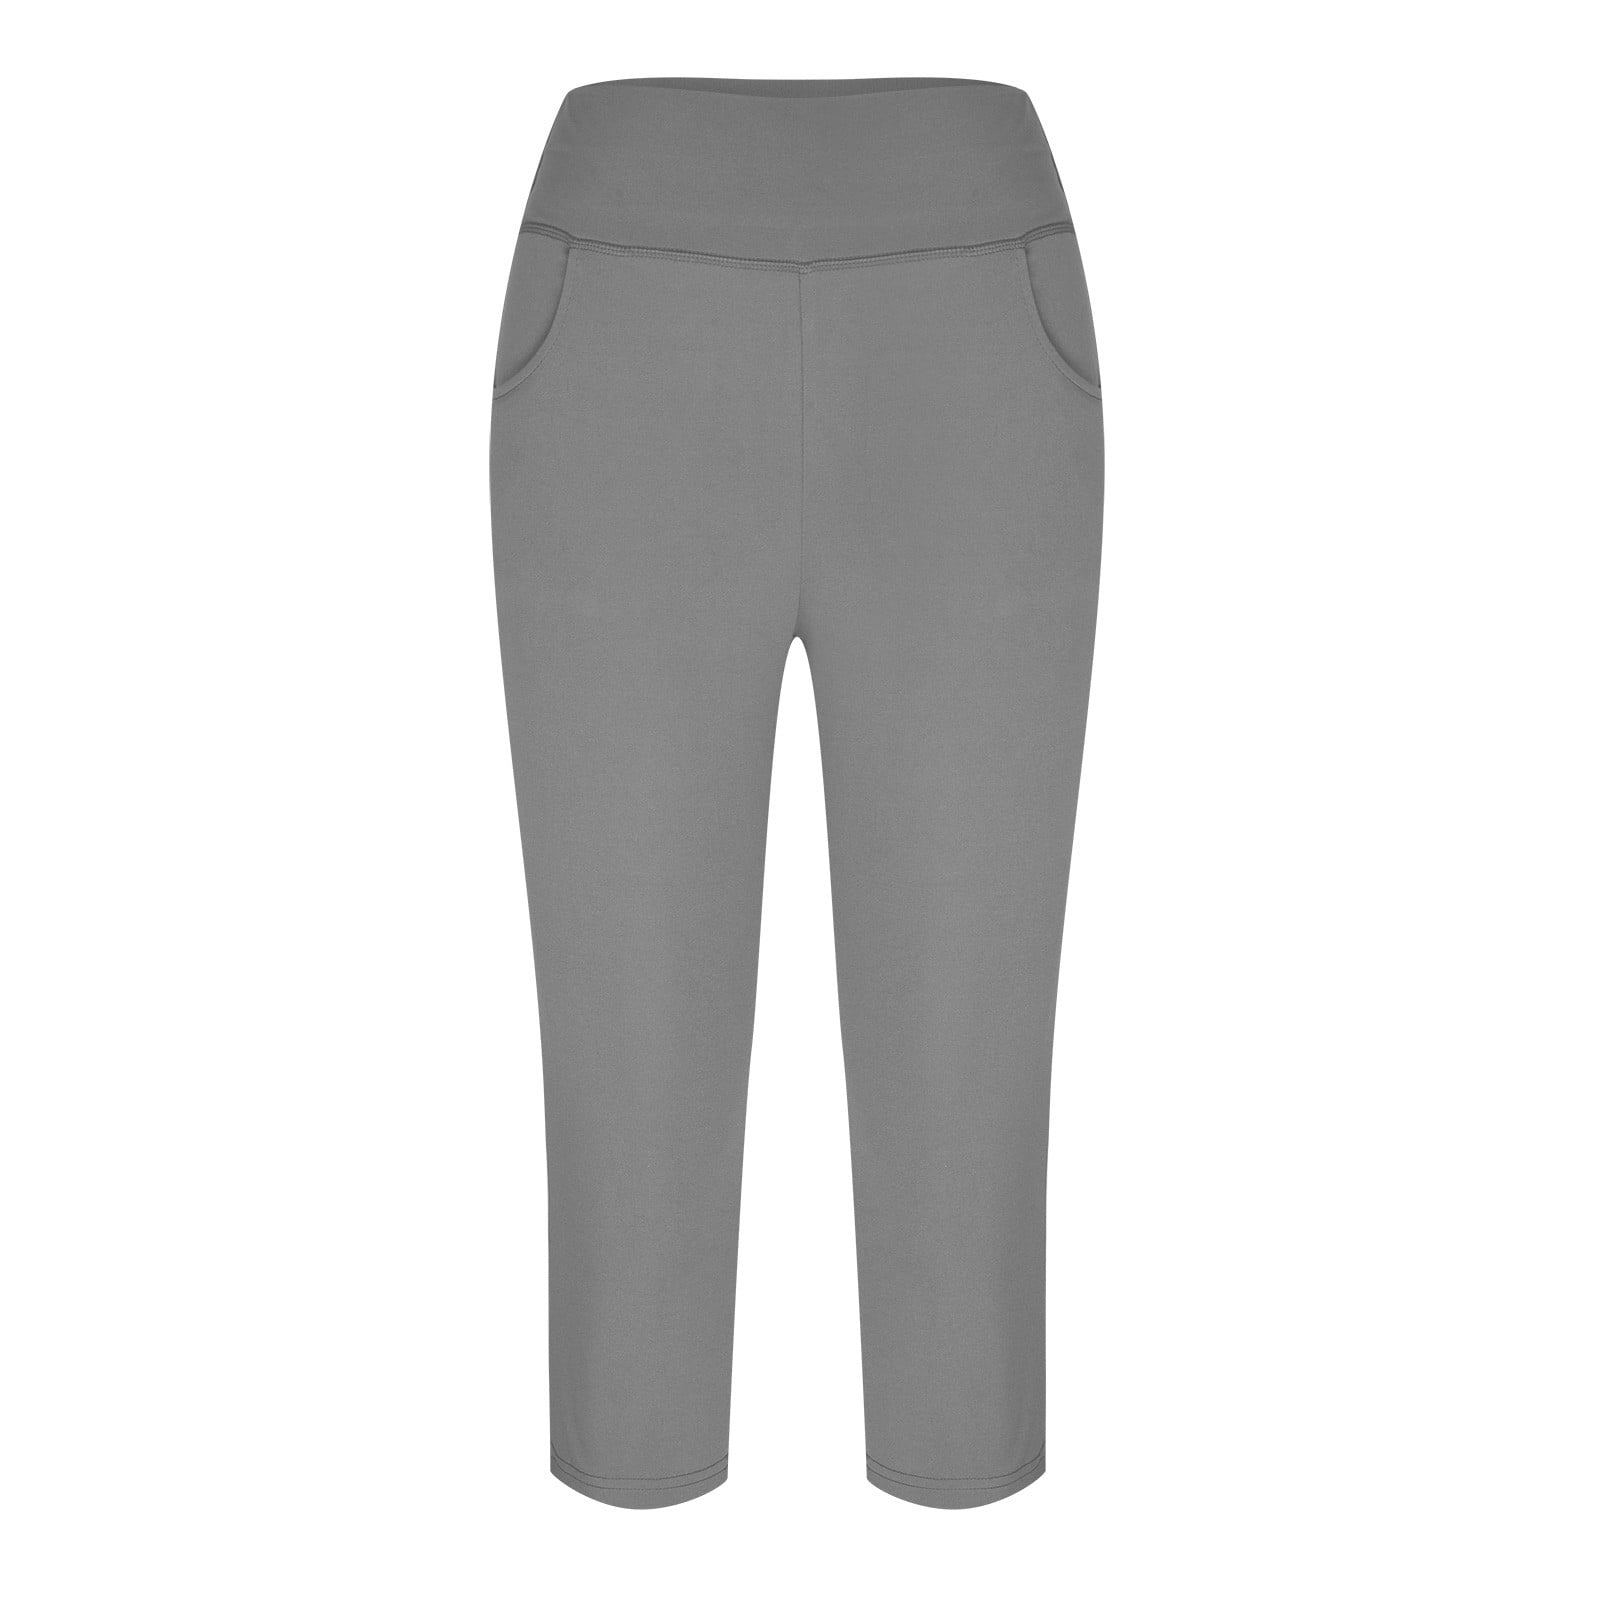 Women Capris High Waist Casual Gym Workout Leggings with Pockets Stretchy  Summer Lounge Cropped Sports Pant 